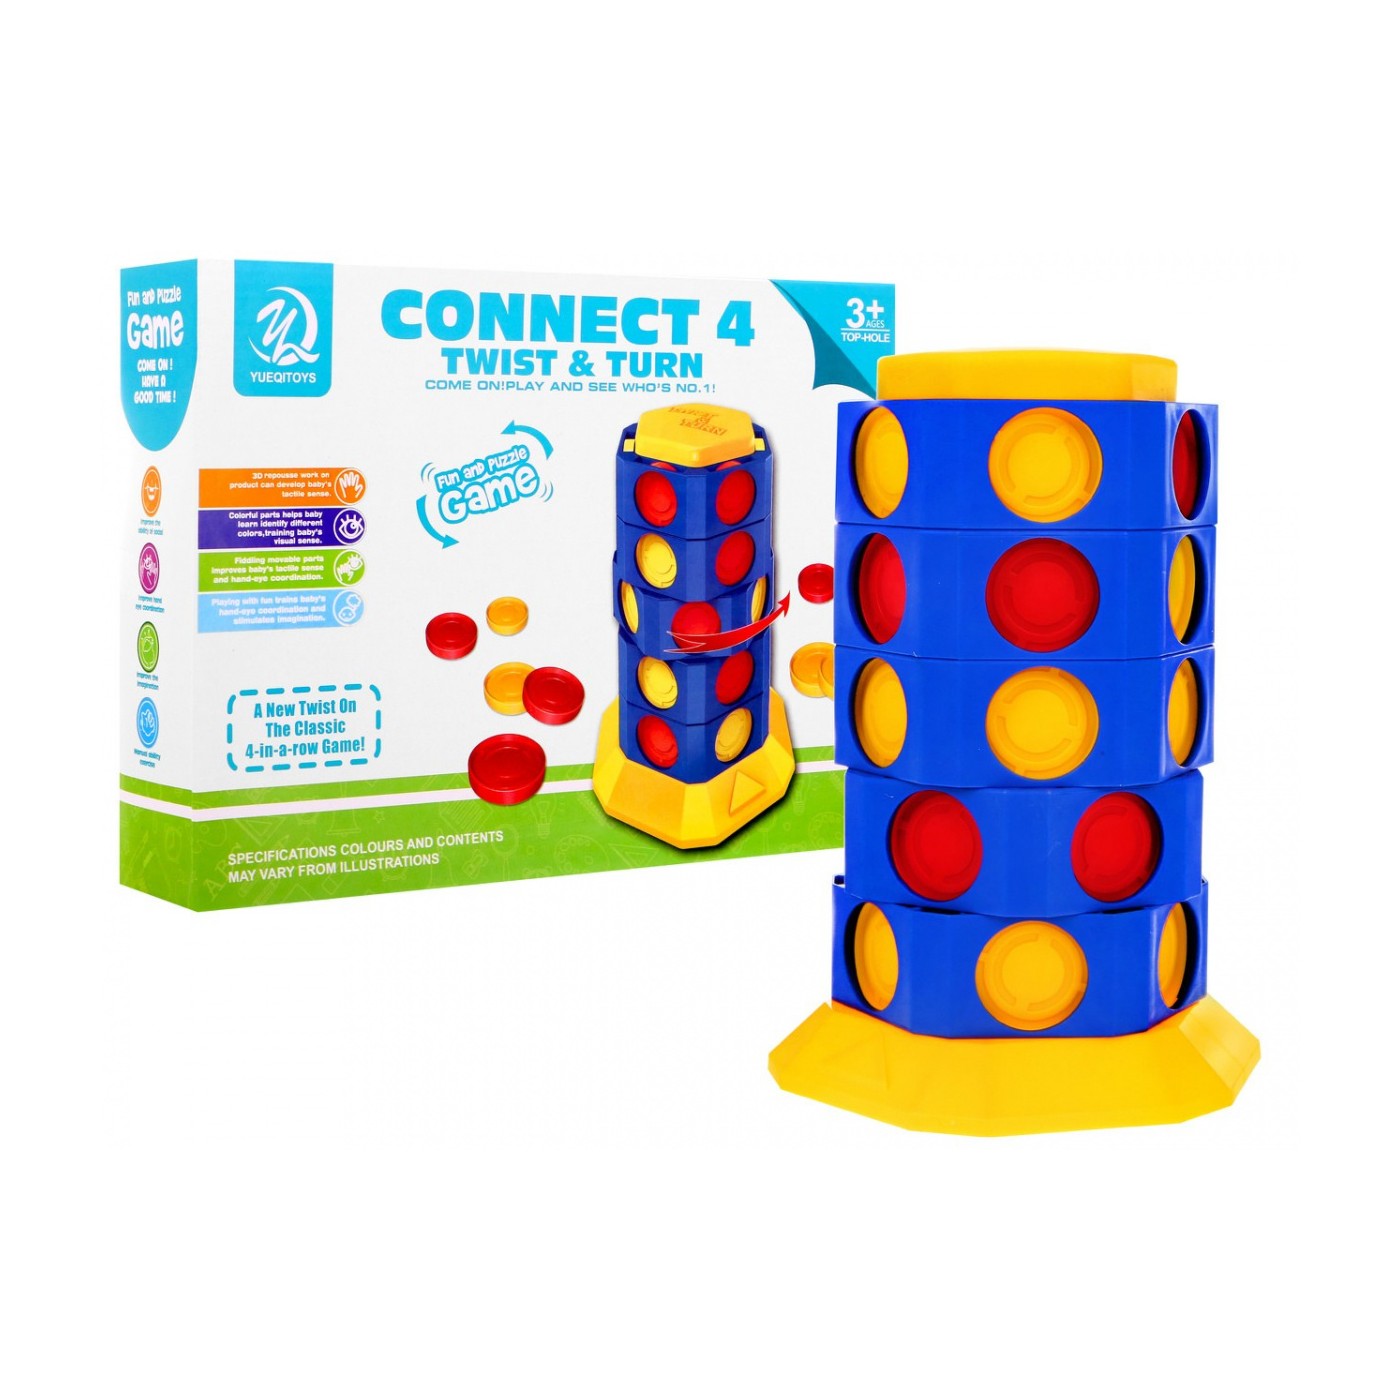 Revamped Retro Games : Connect 4 Twist & Turn